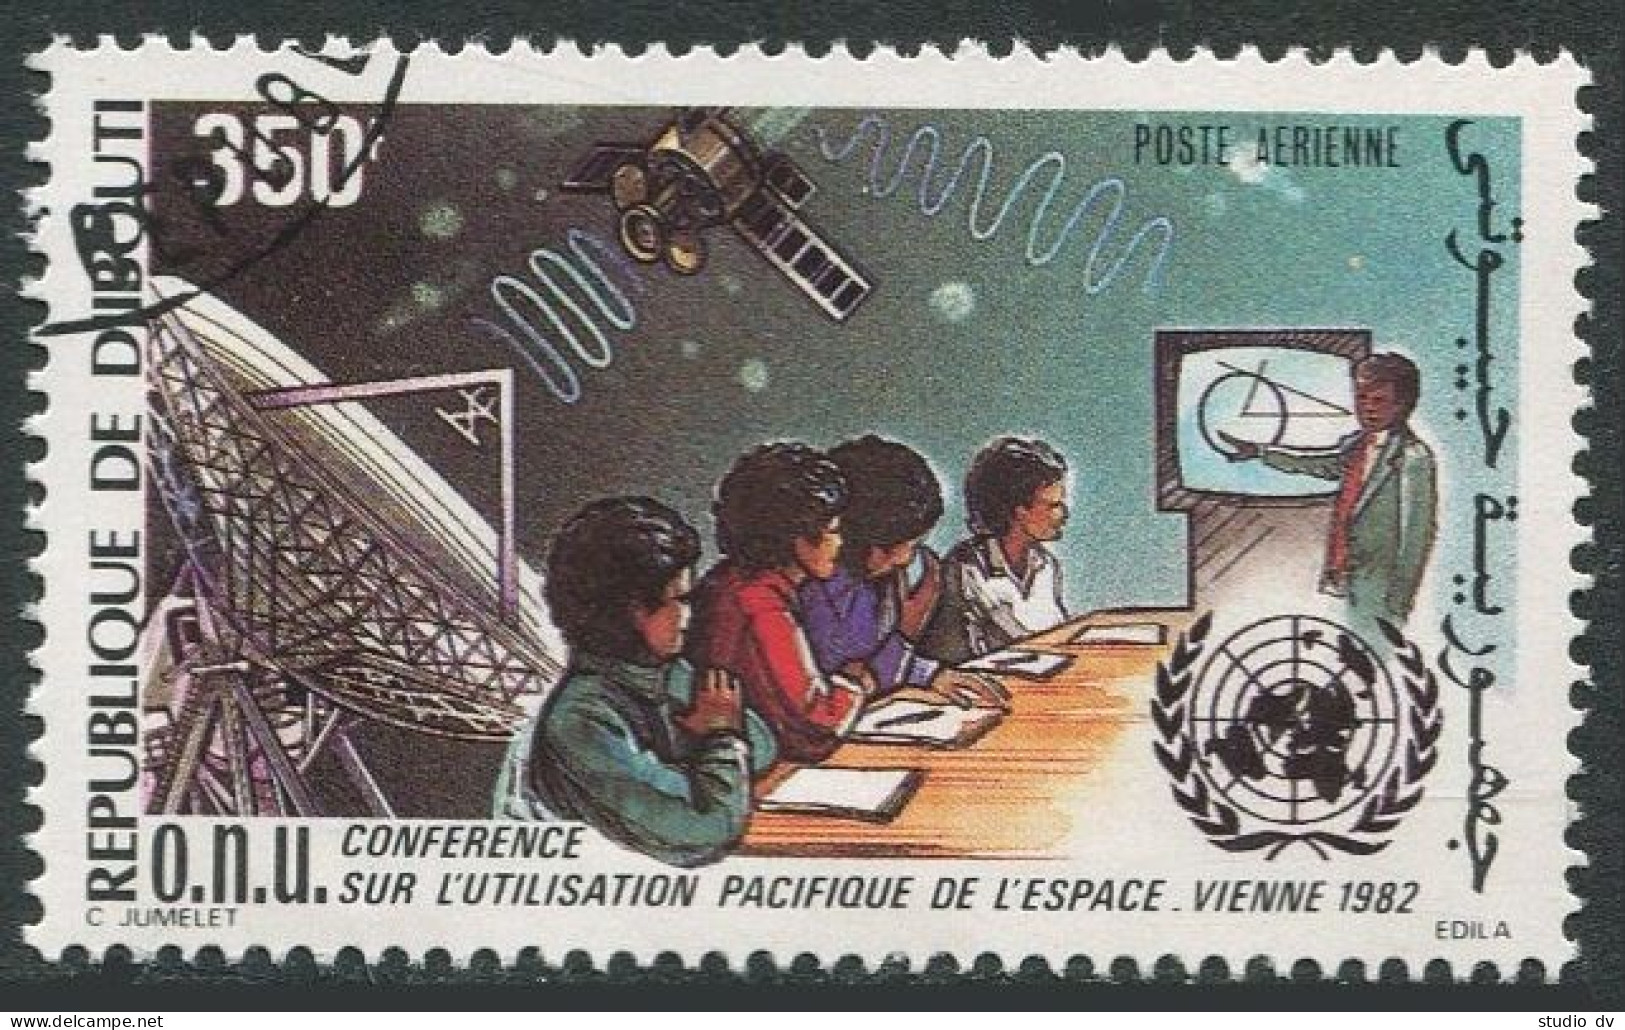 Djibouti C165, CTO. Mi 348. UN Conference On Peaceful Uses Of Outer Space, 1982. - Djibouti (1977-...)